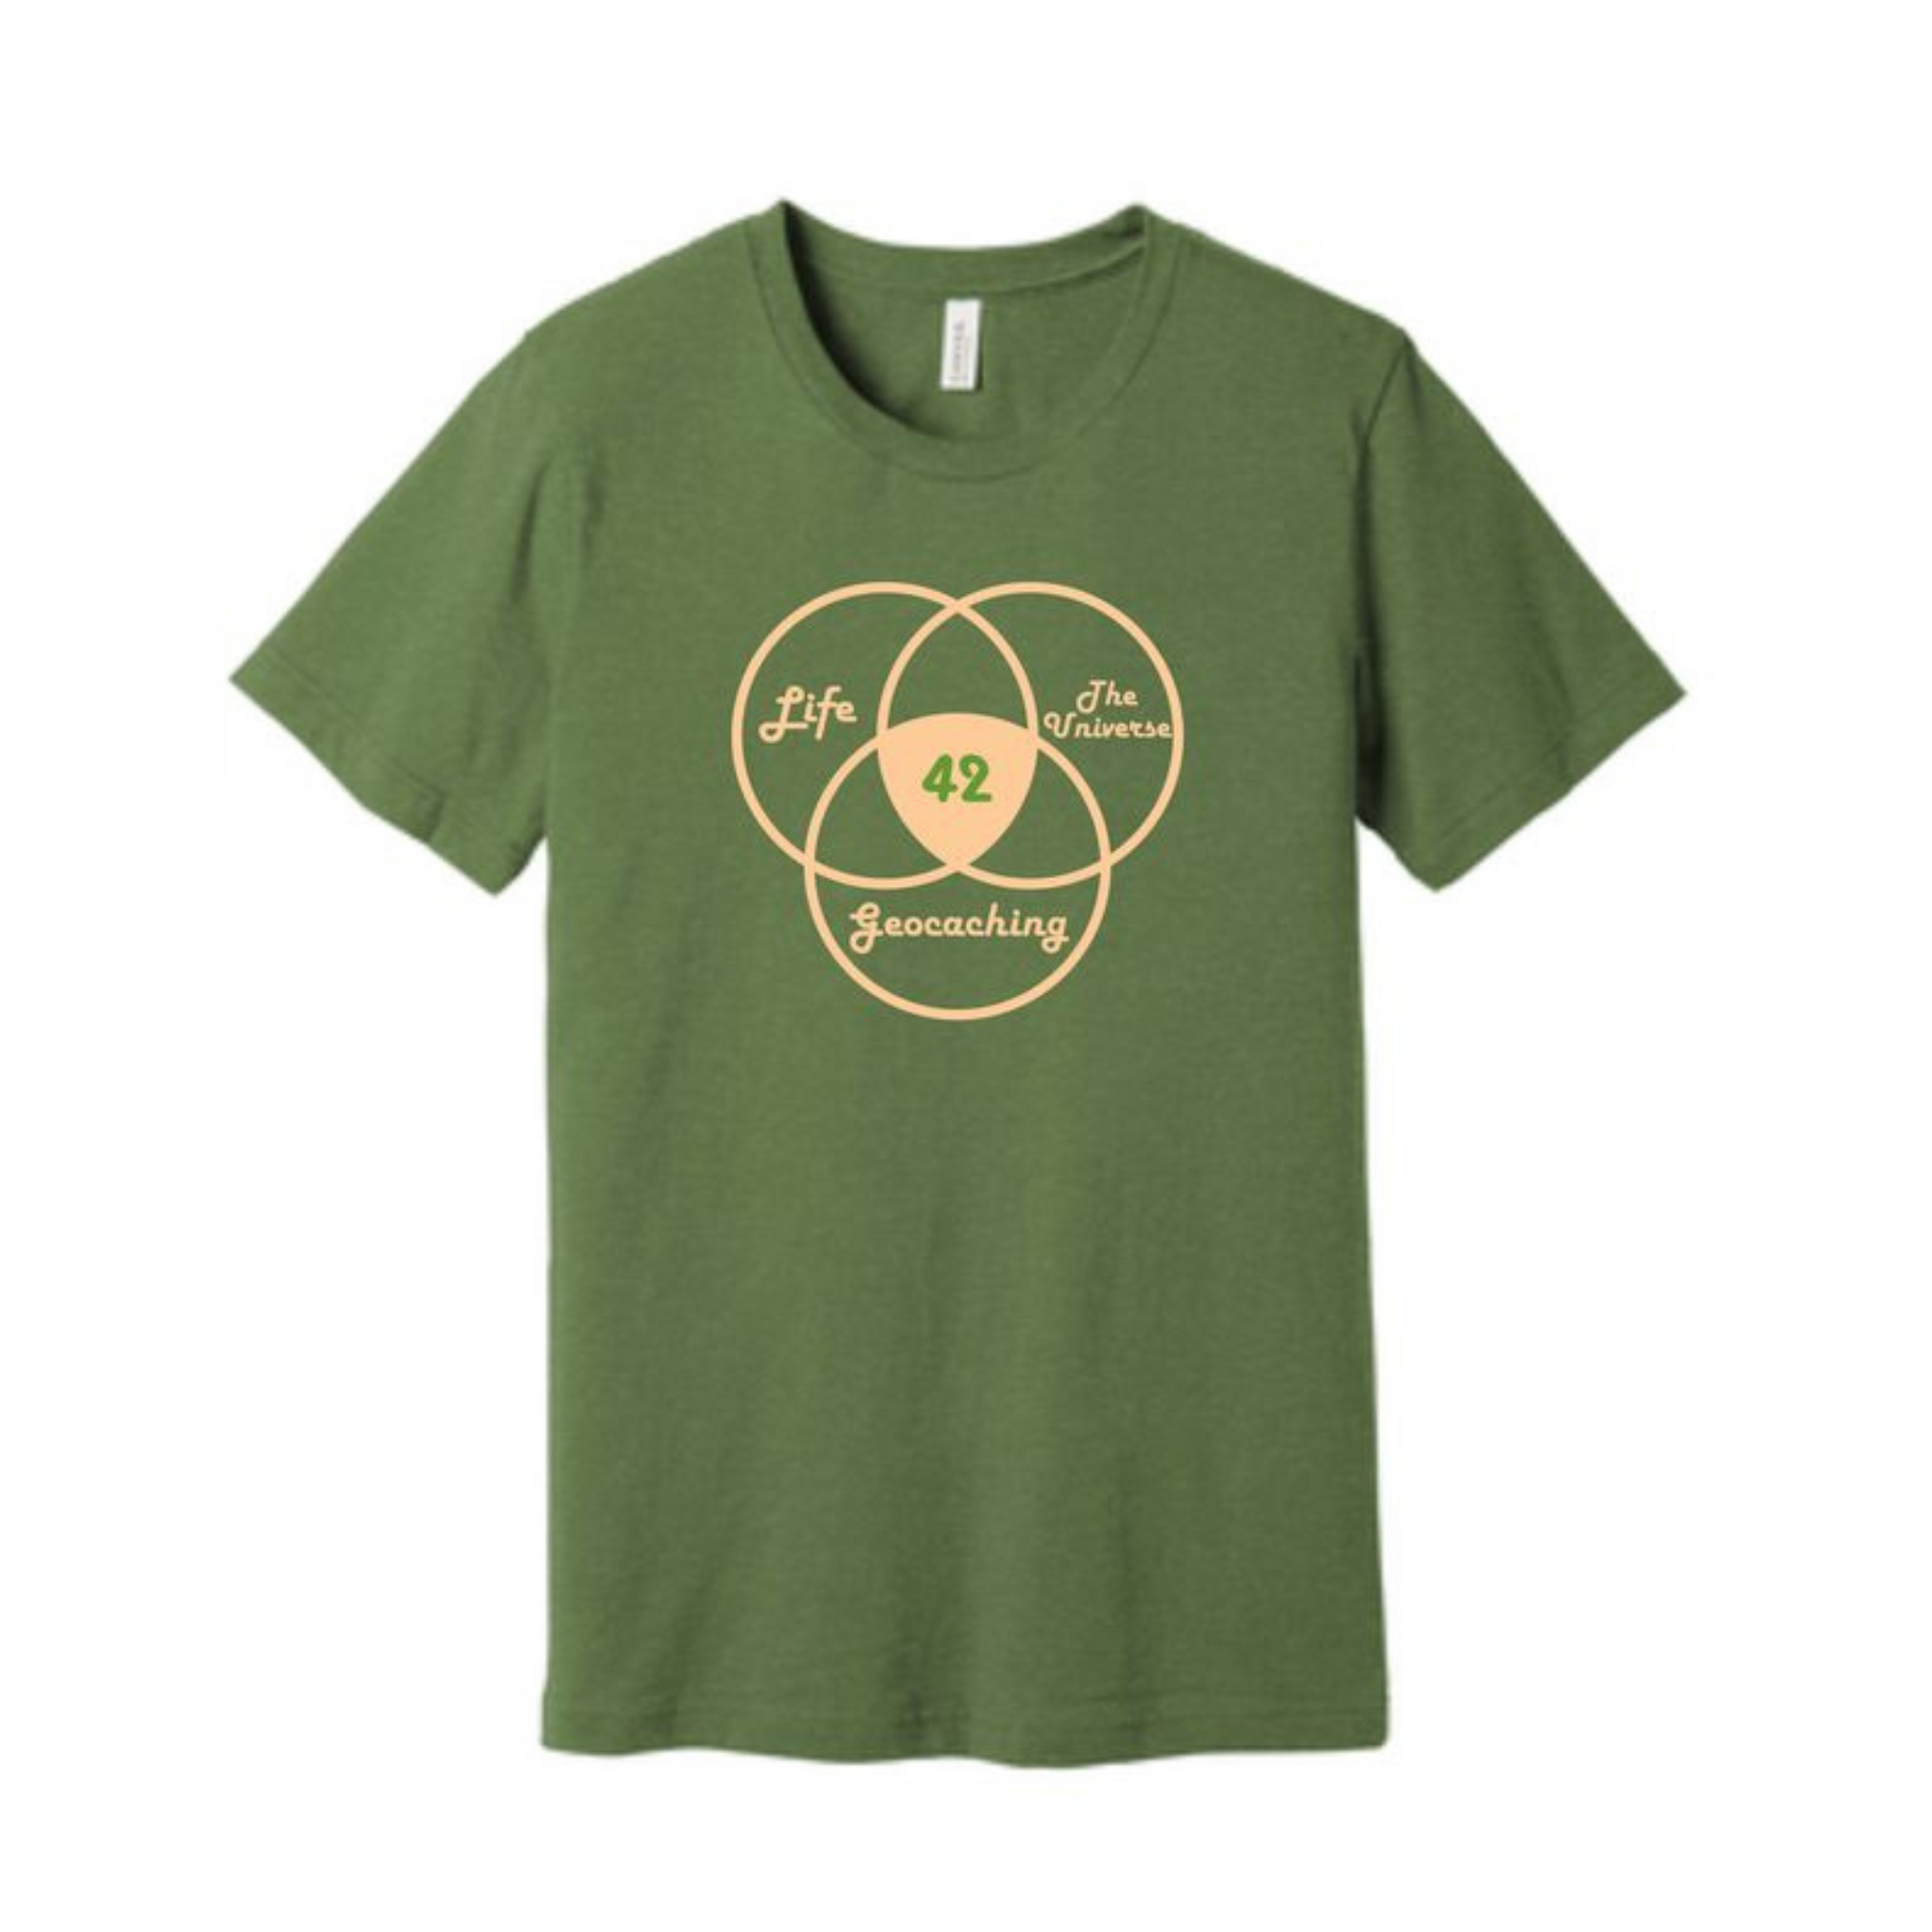 Life, the Universe, and Geocaching - 42 T-Shirt